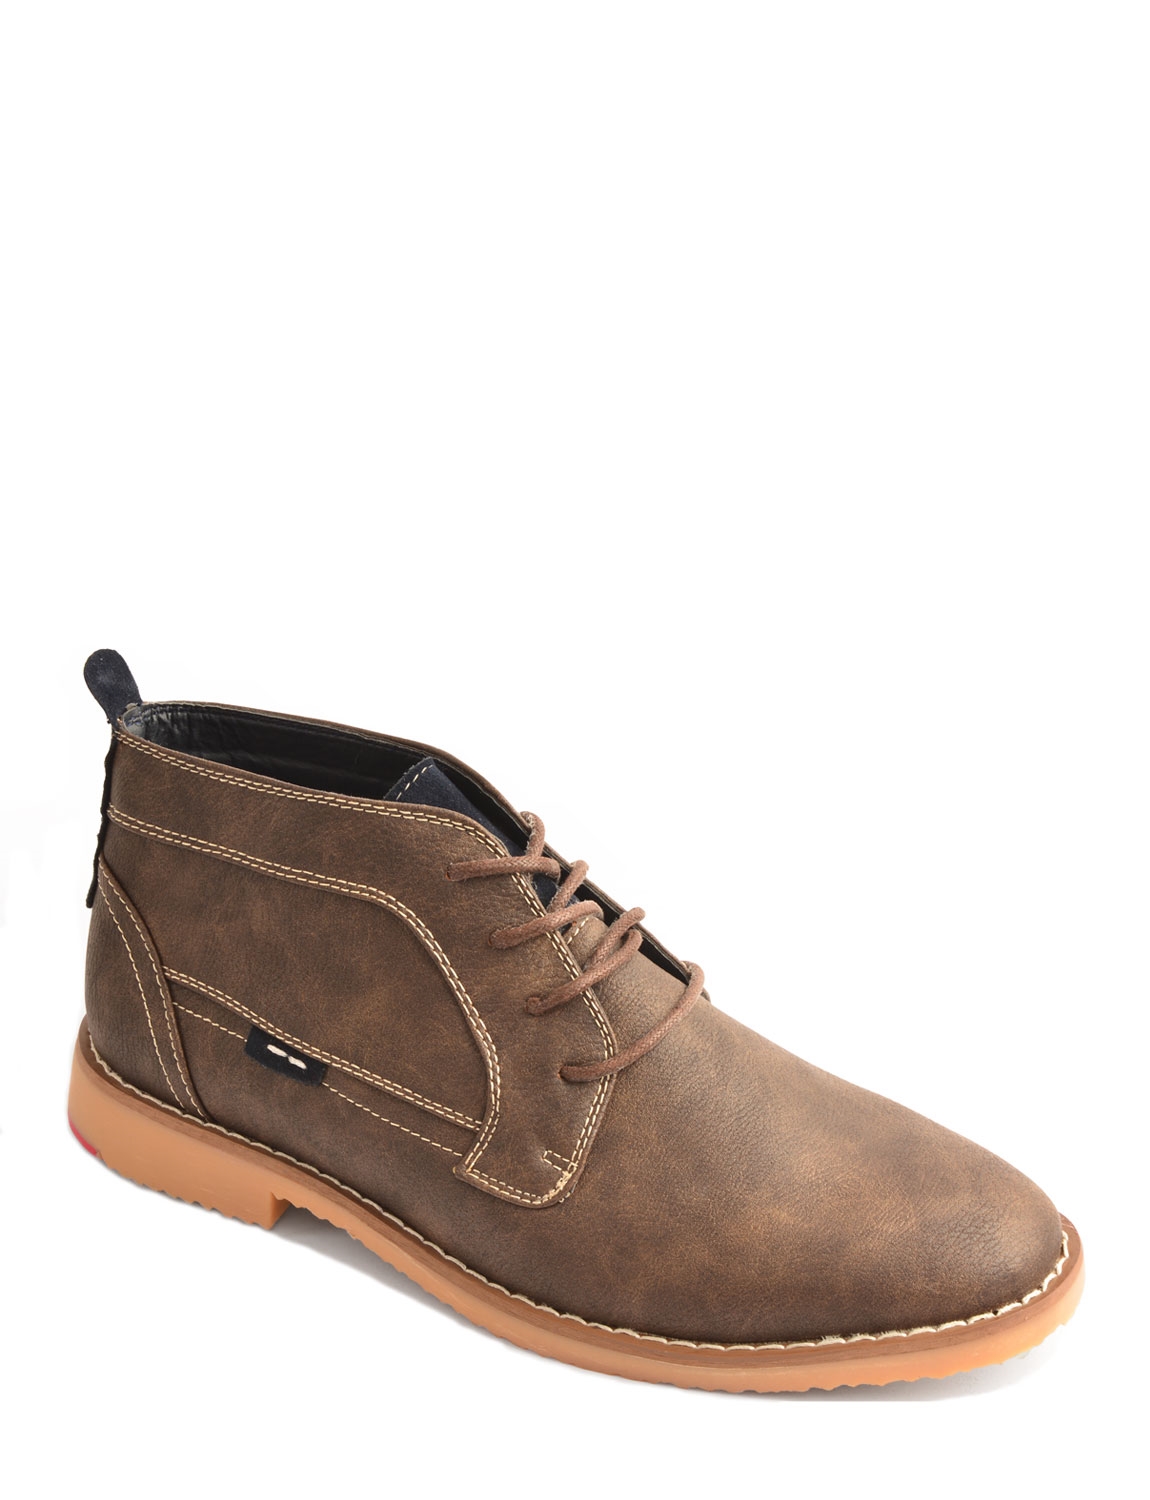 Comfortable & Sturdy Lace-Up Boot | Chums